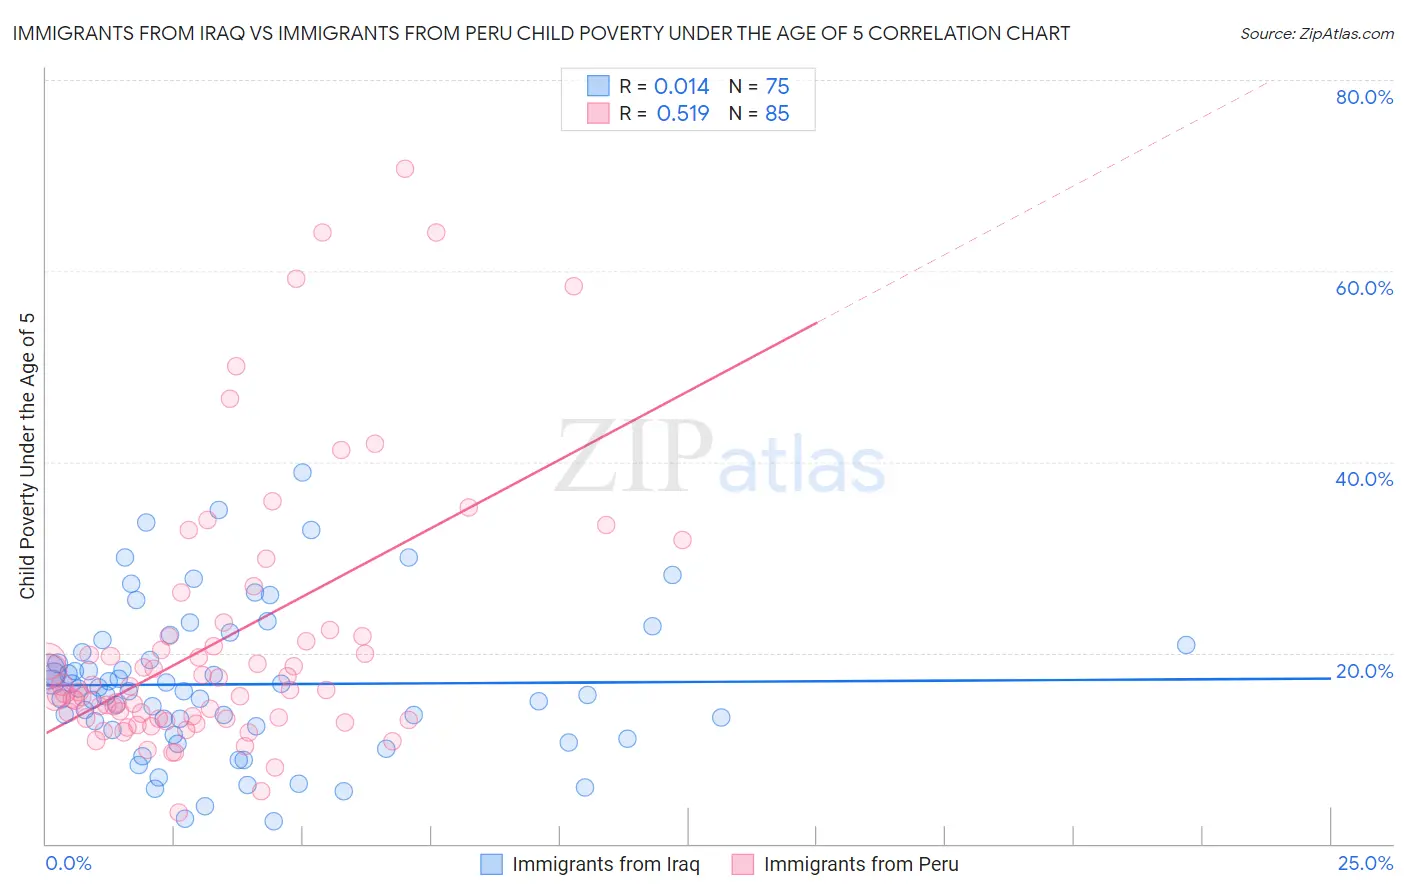 Immigrants from Iraq vs Immigrants from Peru Child Poverty Under the Age of 5